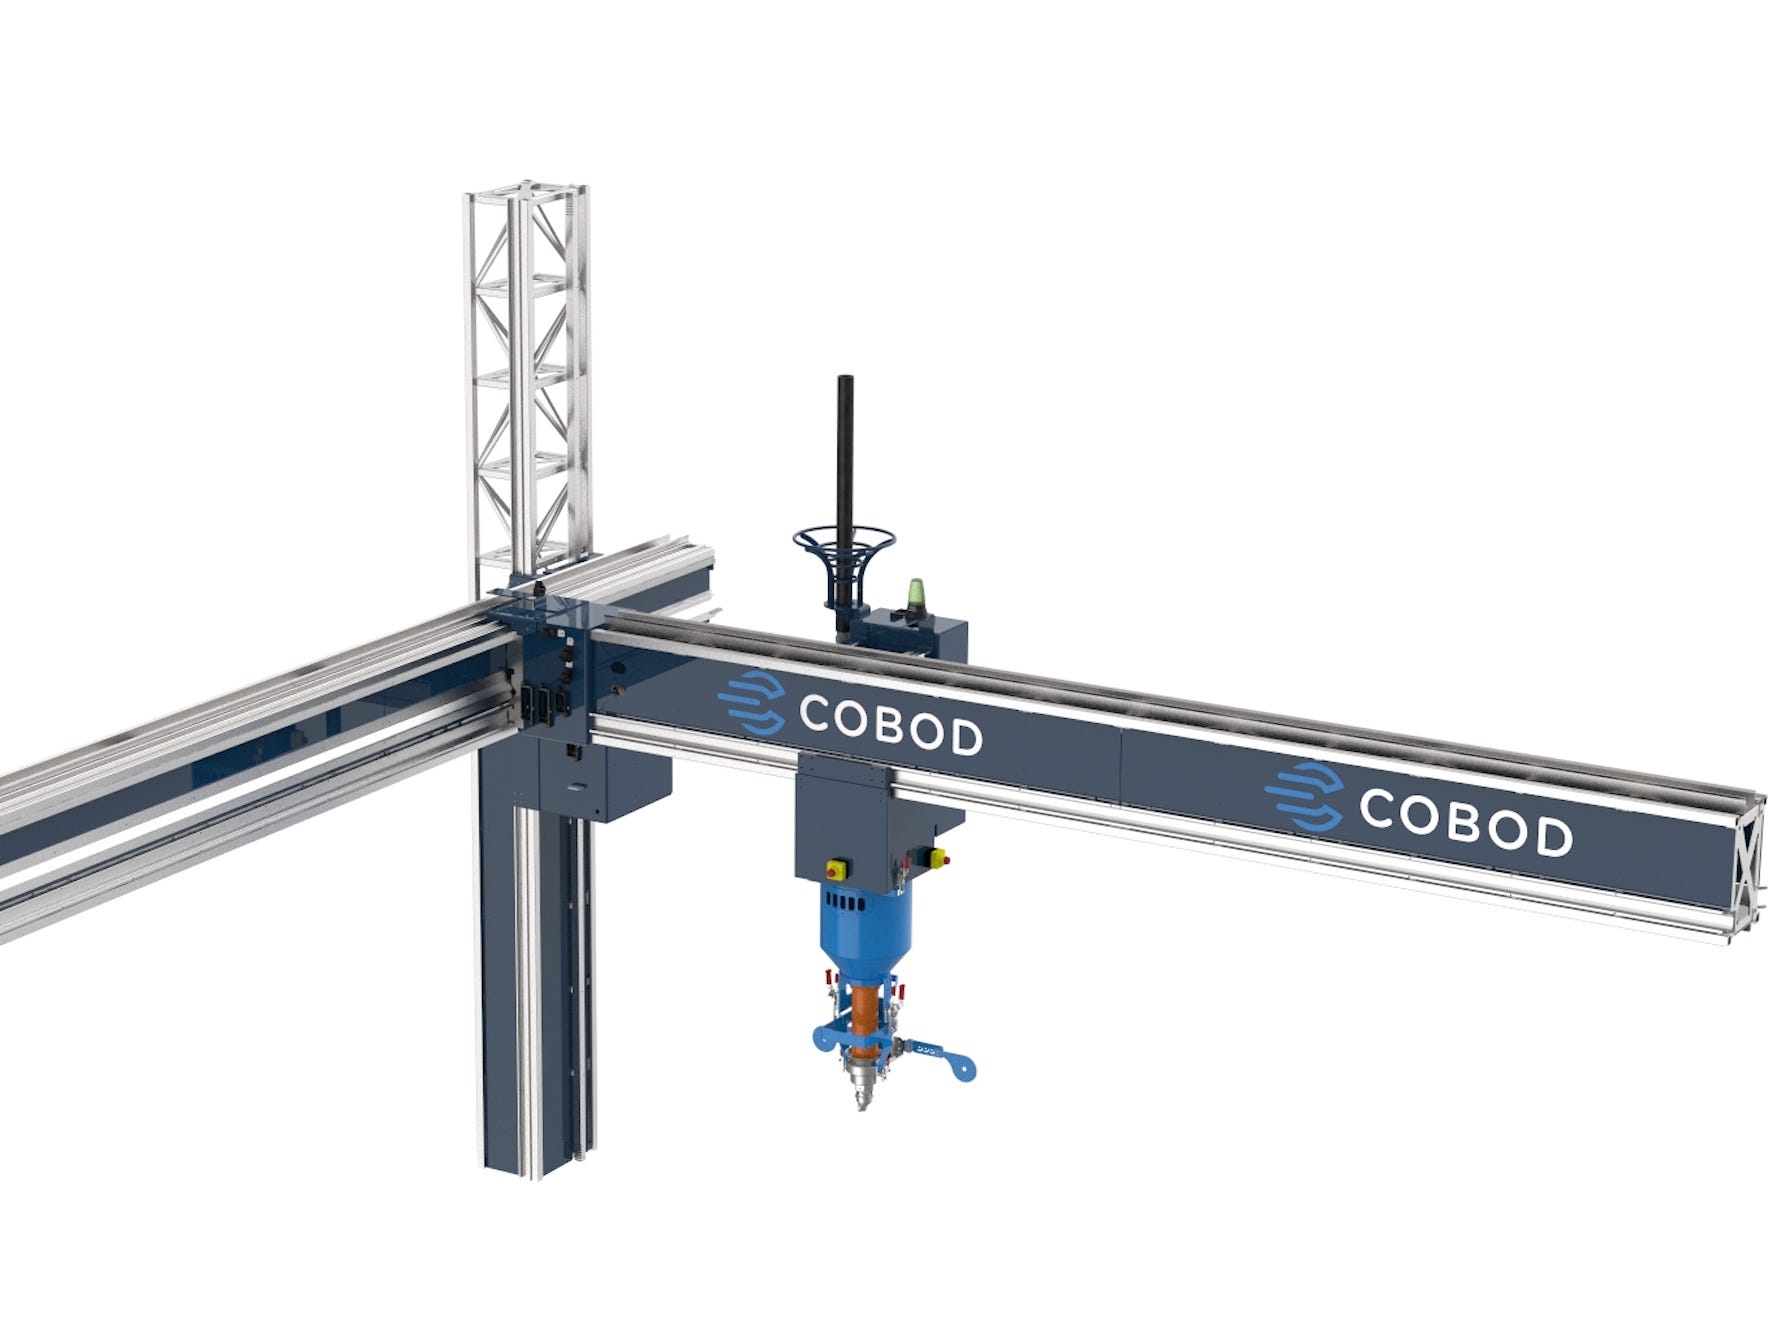 a rendering of the COBOD 3D printer